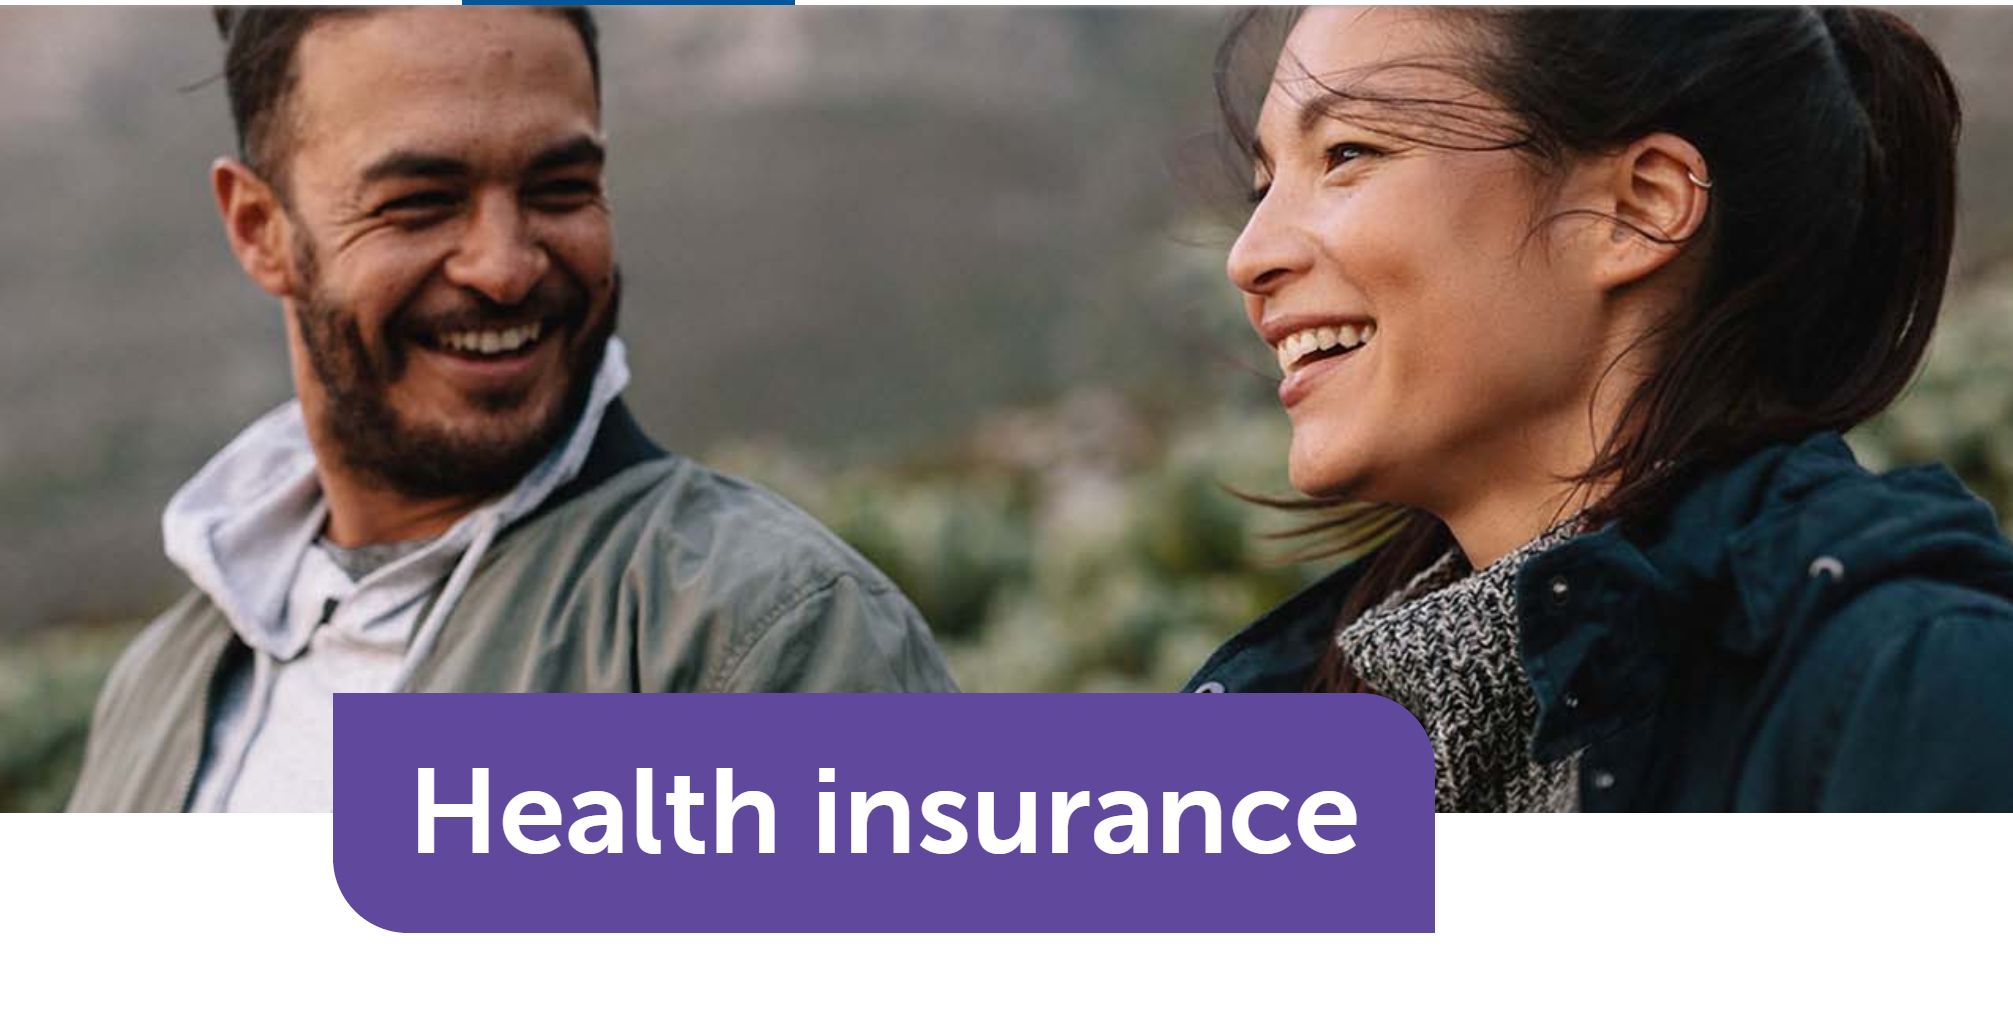 Healthpartners Log In: Come And Partner With Healthpartners For Your Health Care And Health Insurance Services